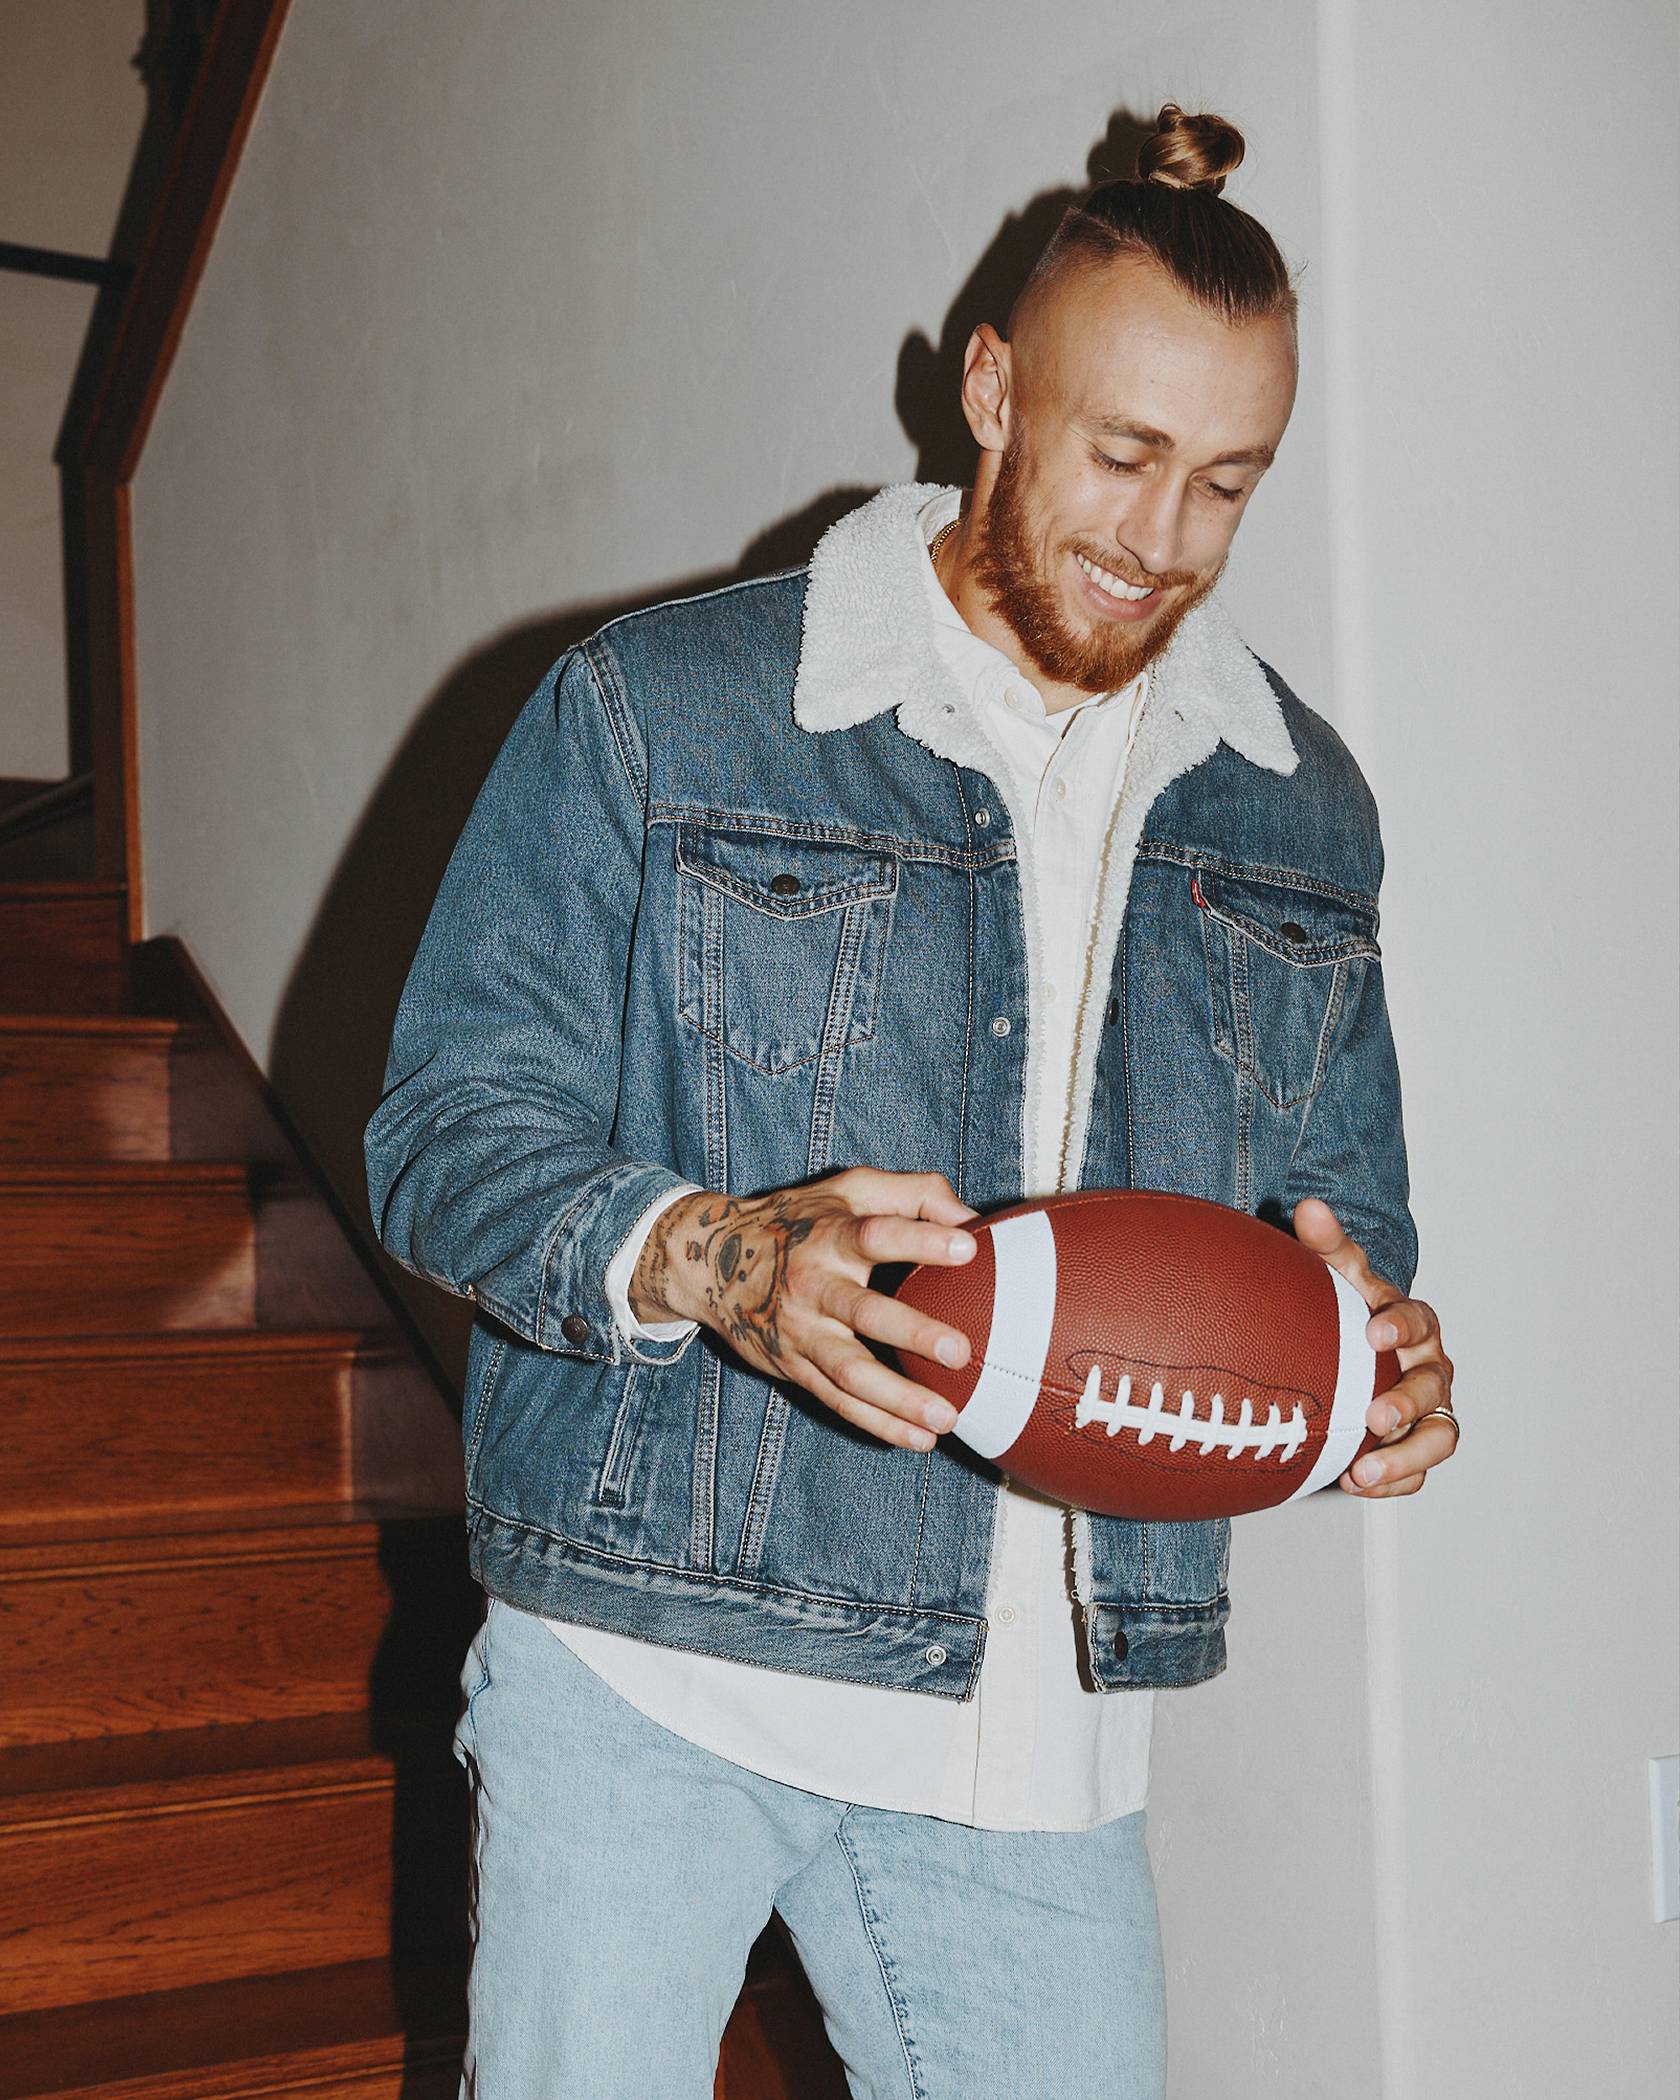 Image of George Kittle holding a football.